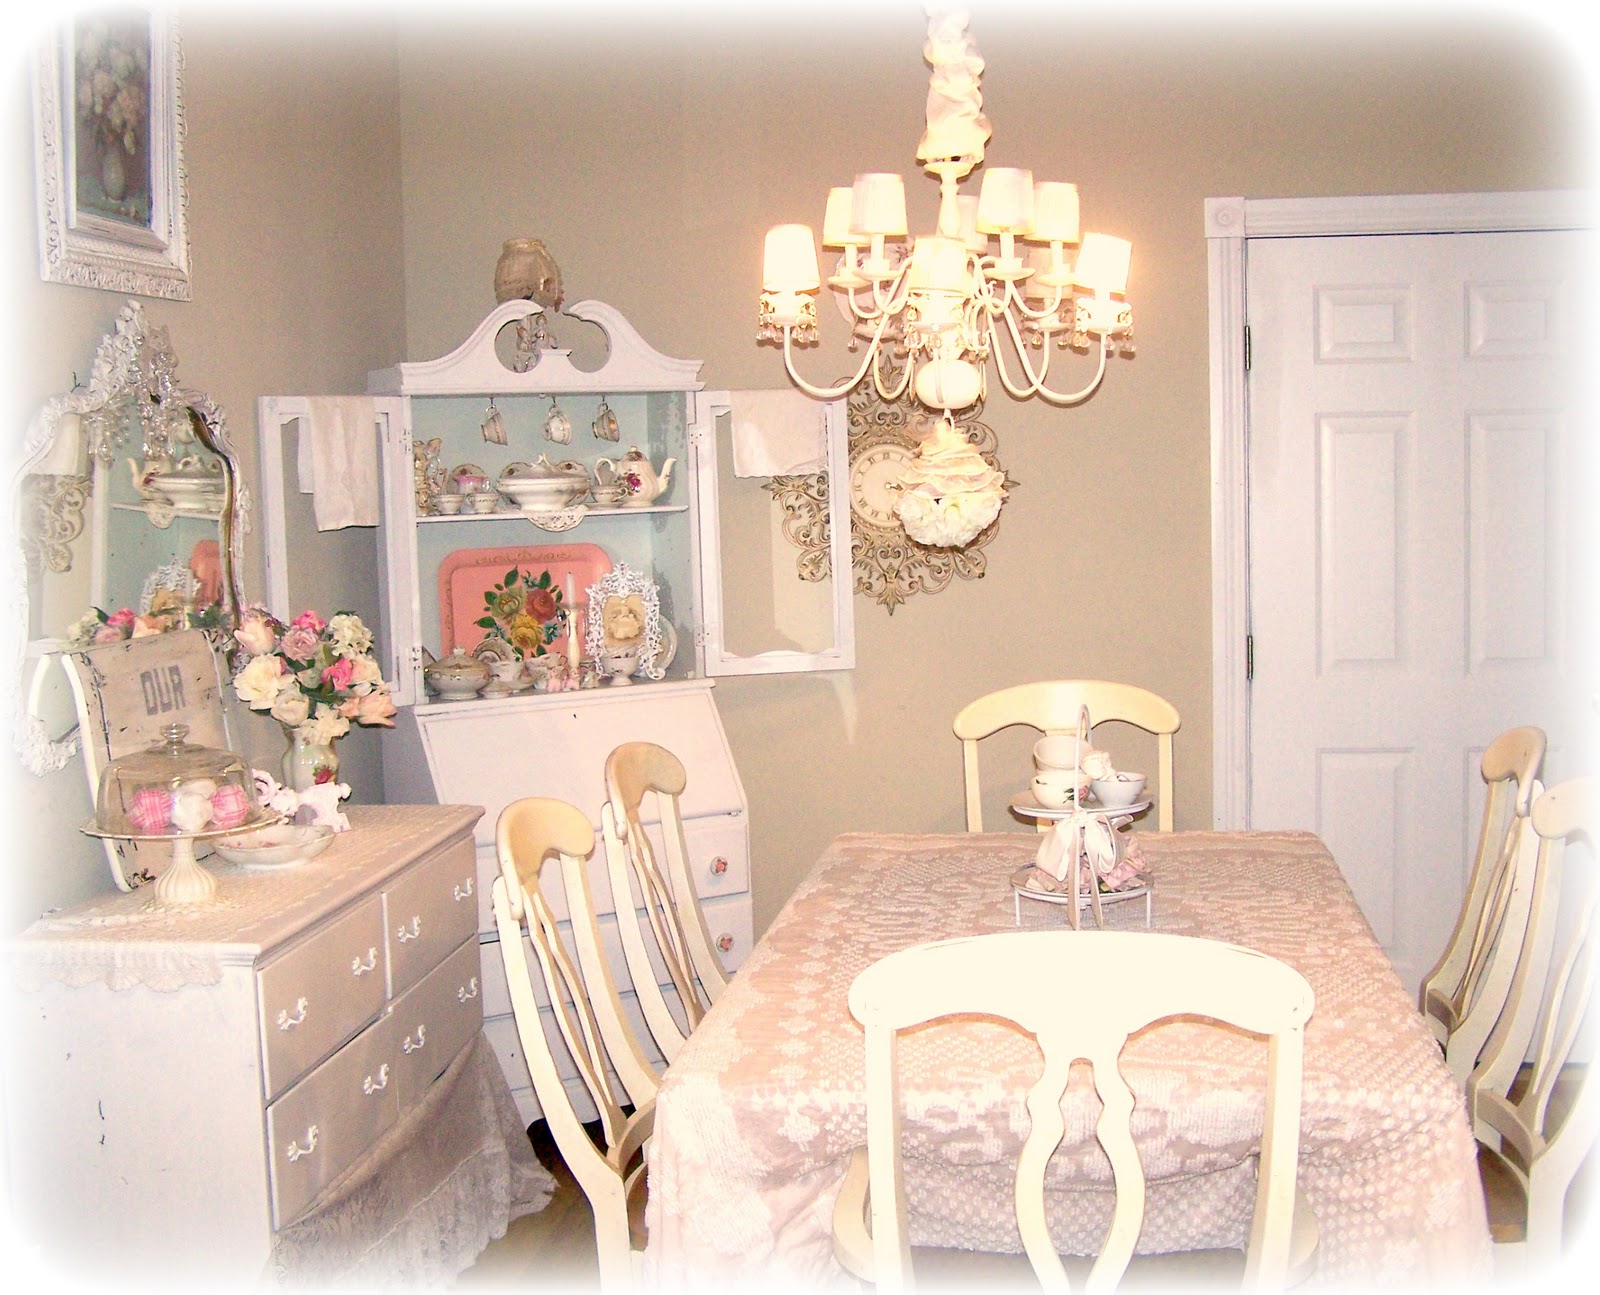 Olivia's Romantic Home: Shabby Chic Cottage Dining Room!